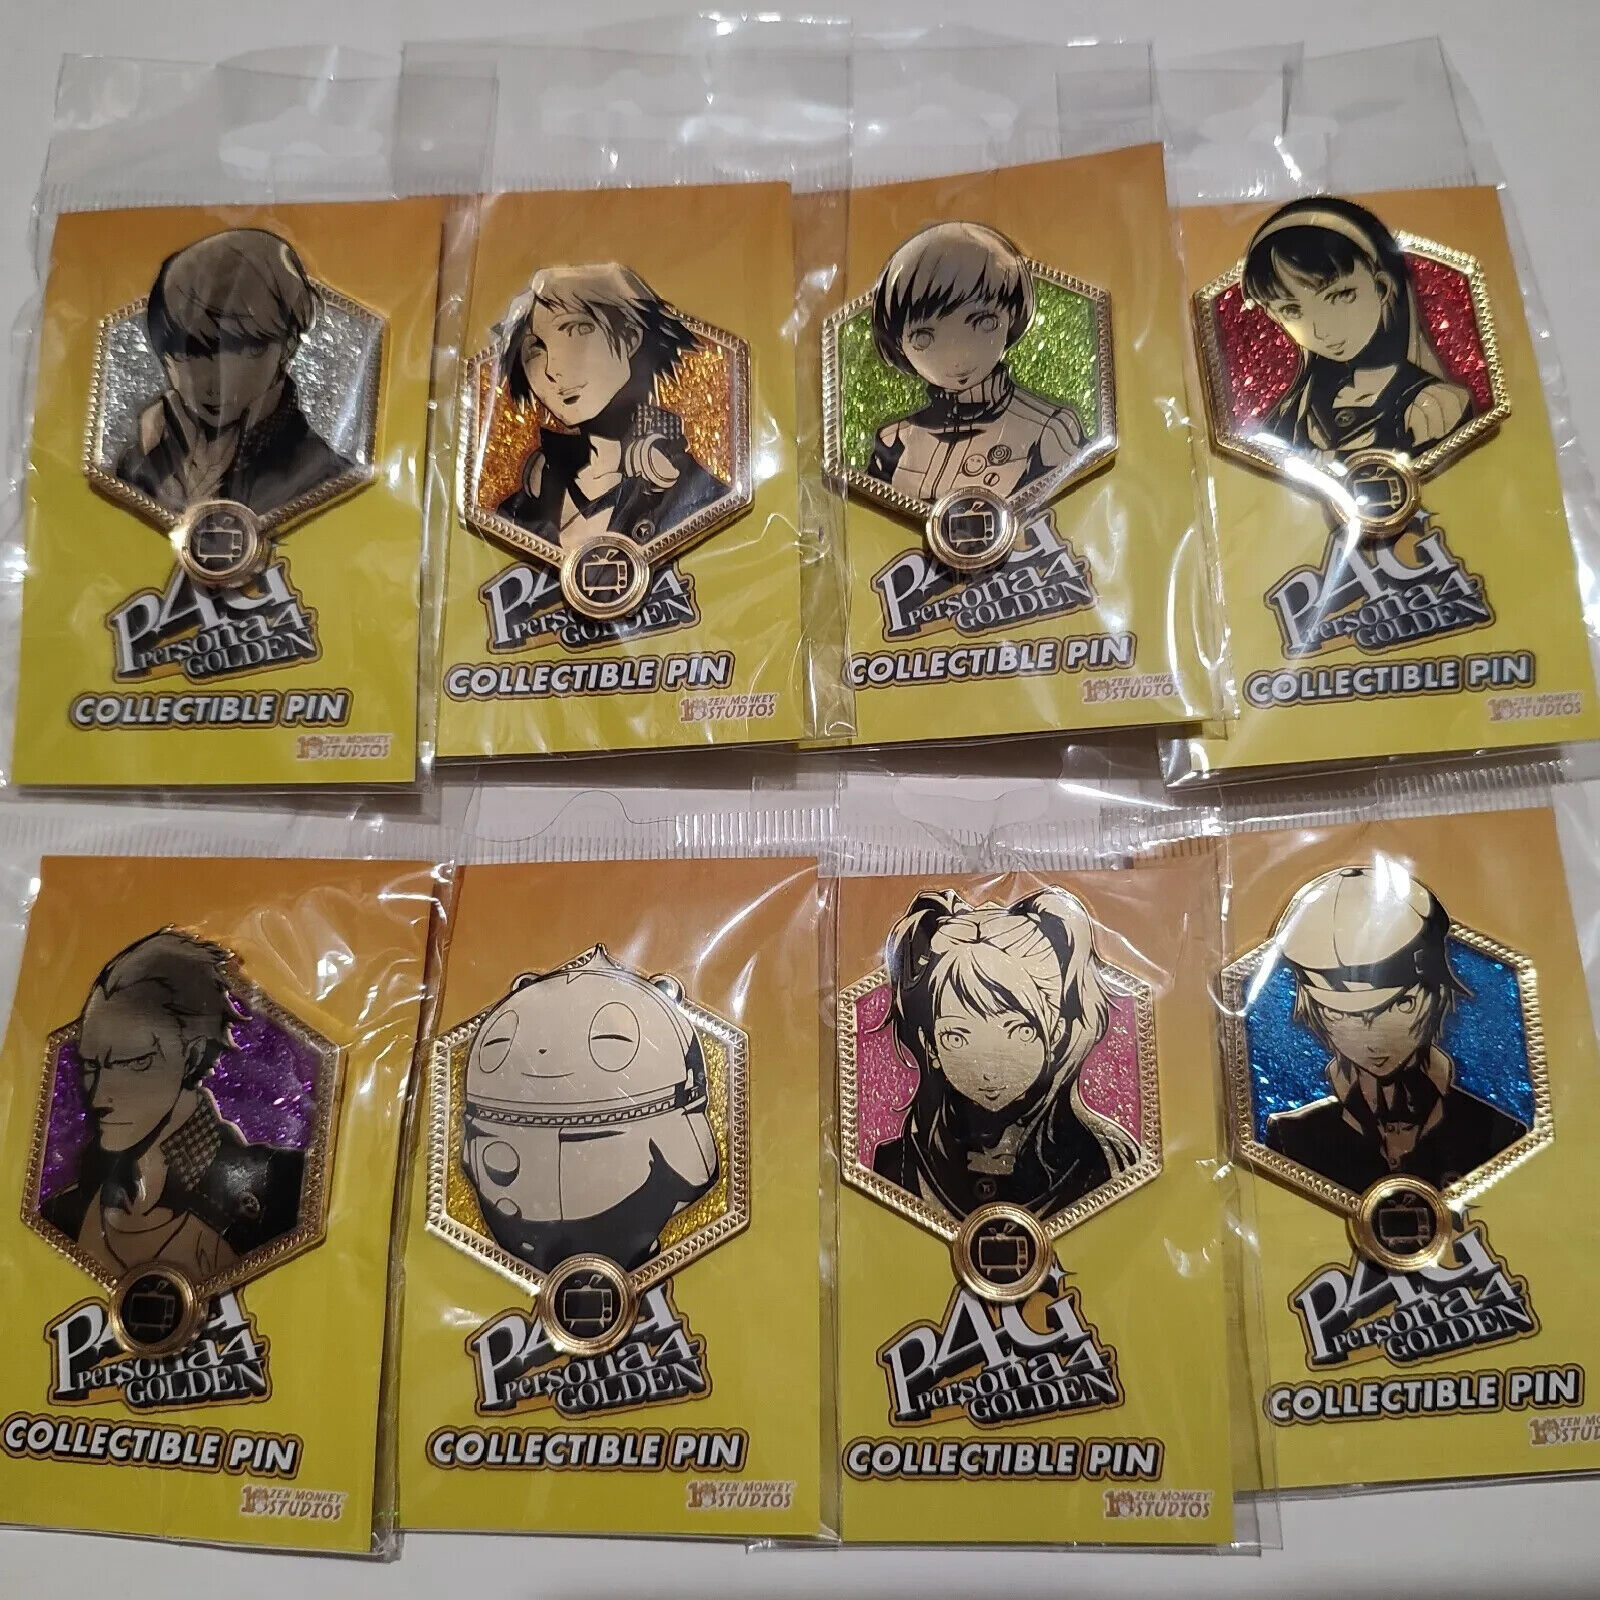 Persona 4 Golden Investigation Team Enamel Pins Set of 8 Official Collectibles